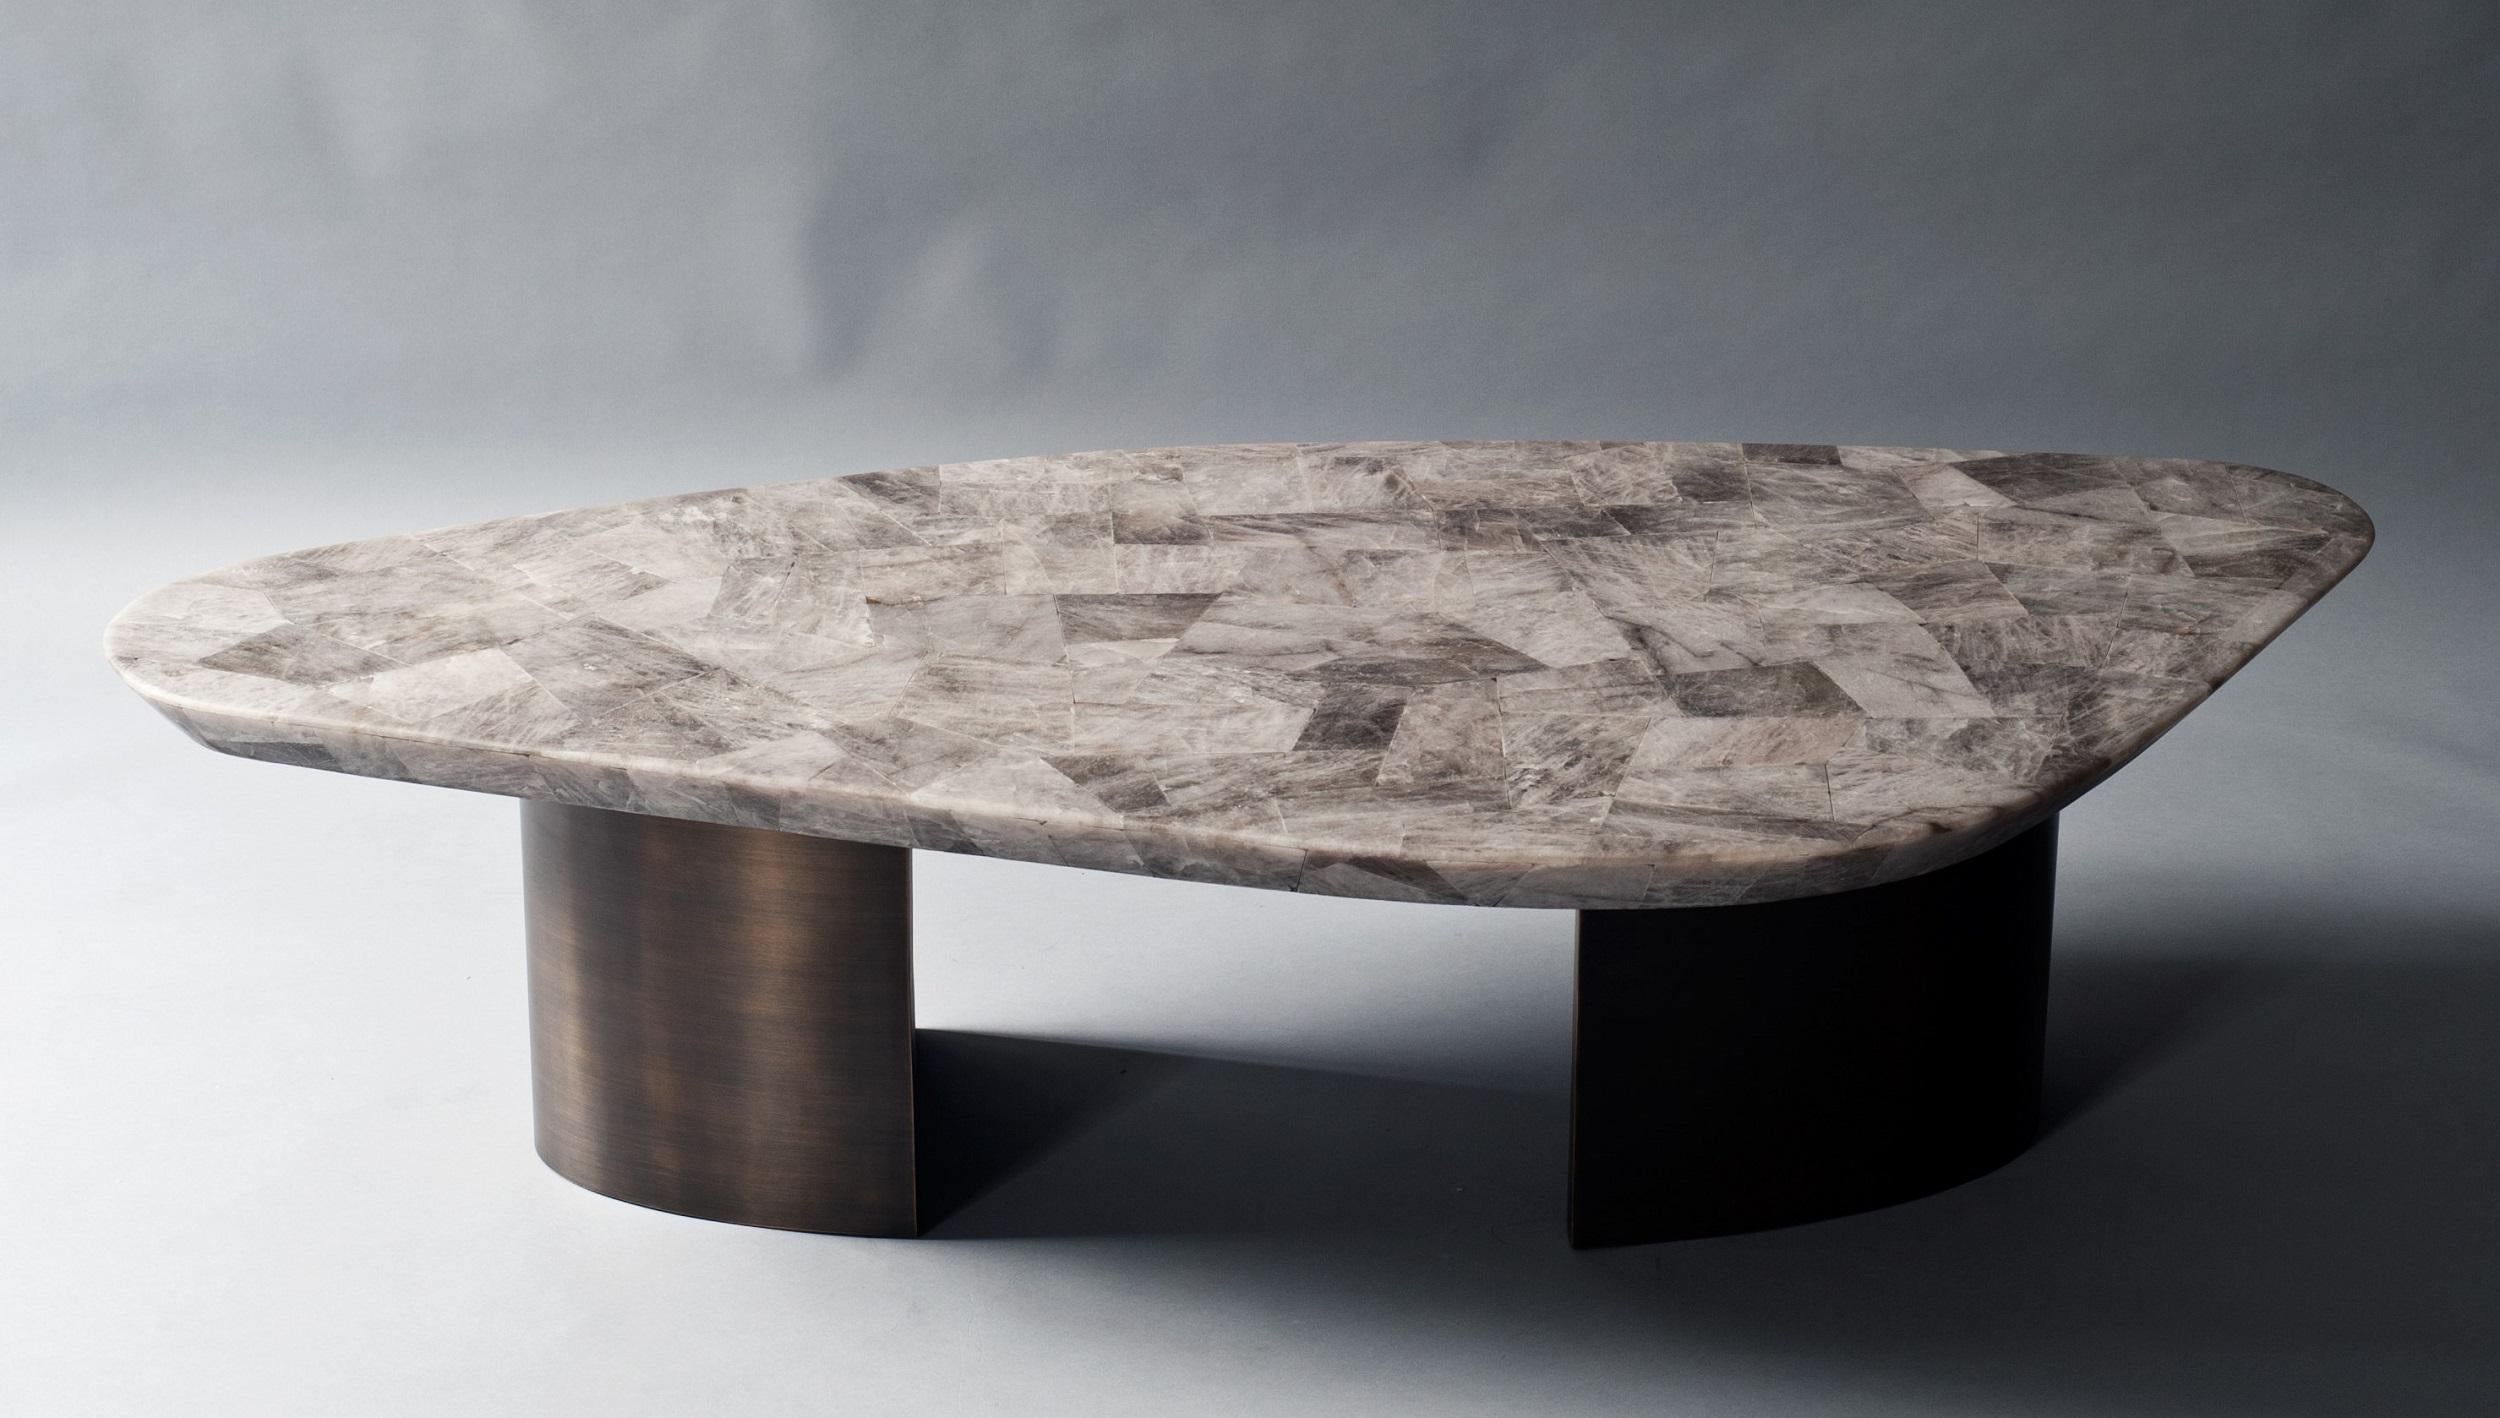 The ledge nested coffee or cocktail tables have sculptural tops in leathered Smokey Quartz supported by an antique brass base. The tables can be purchased individually or as a pair as shown.